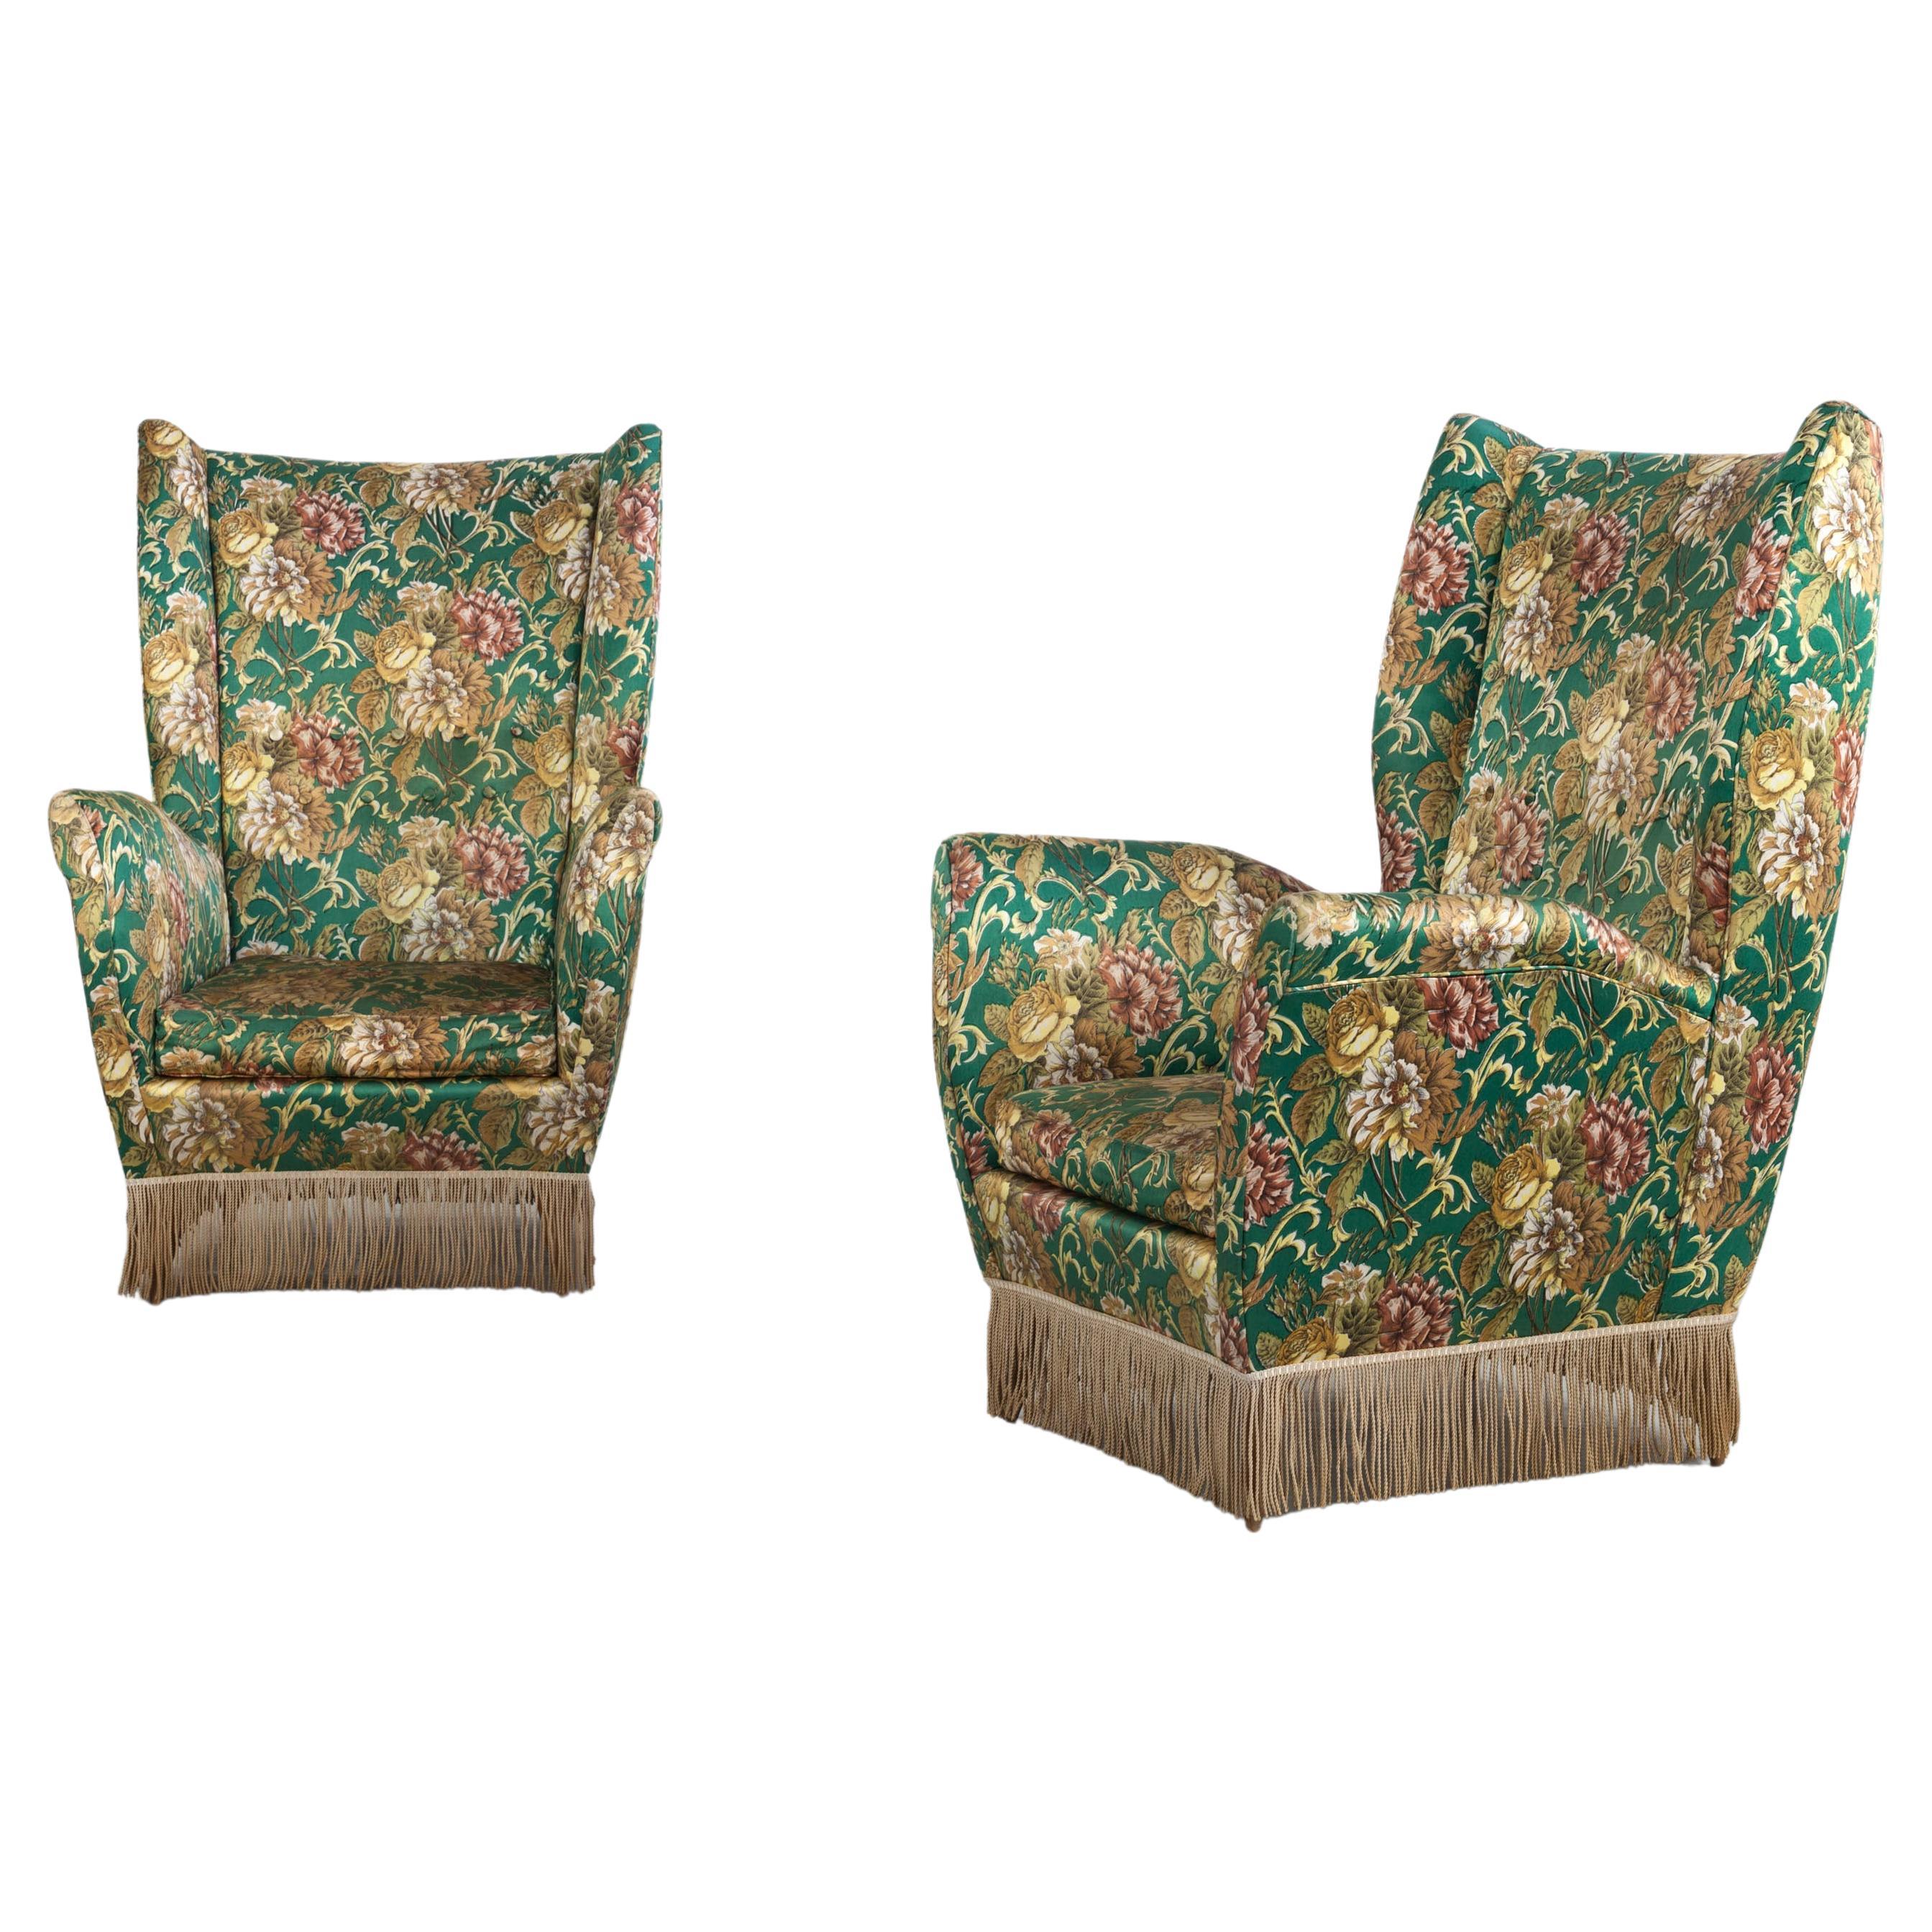 Set of Two I. S. A. Bergamo Italian Floral upholstered Wingback Chairs, 1950s For Sale